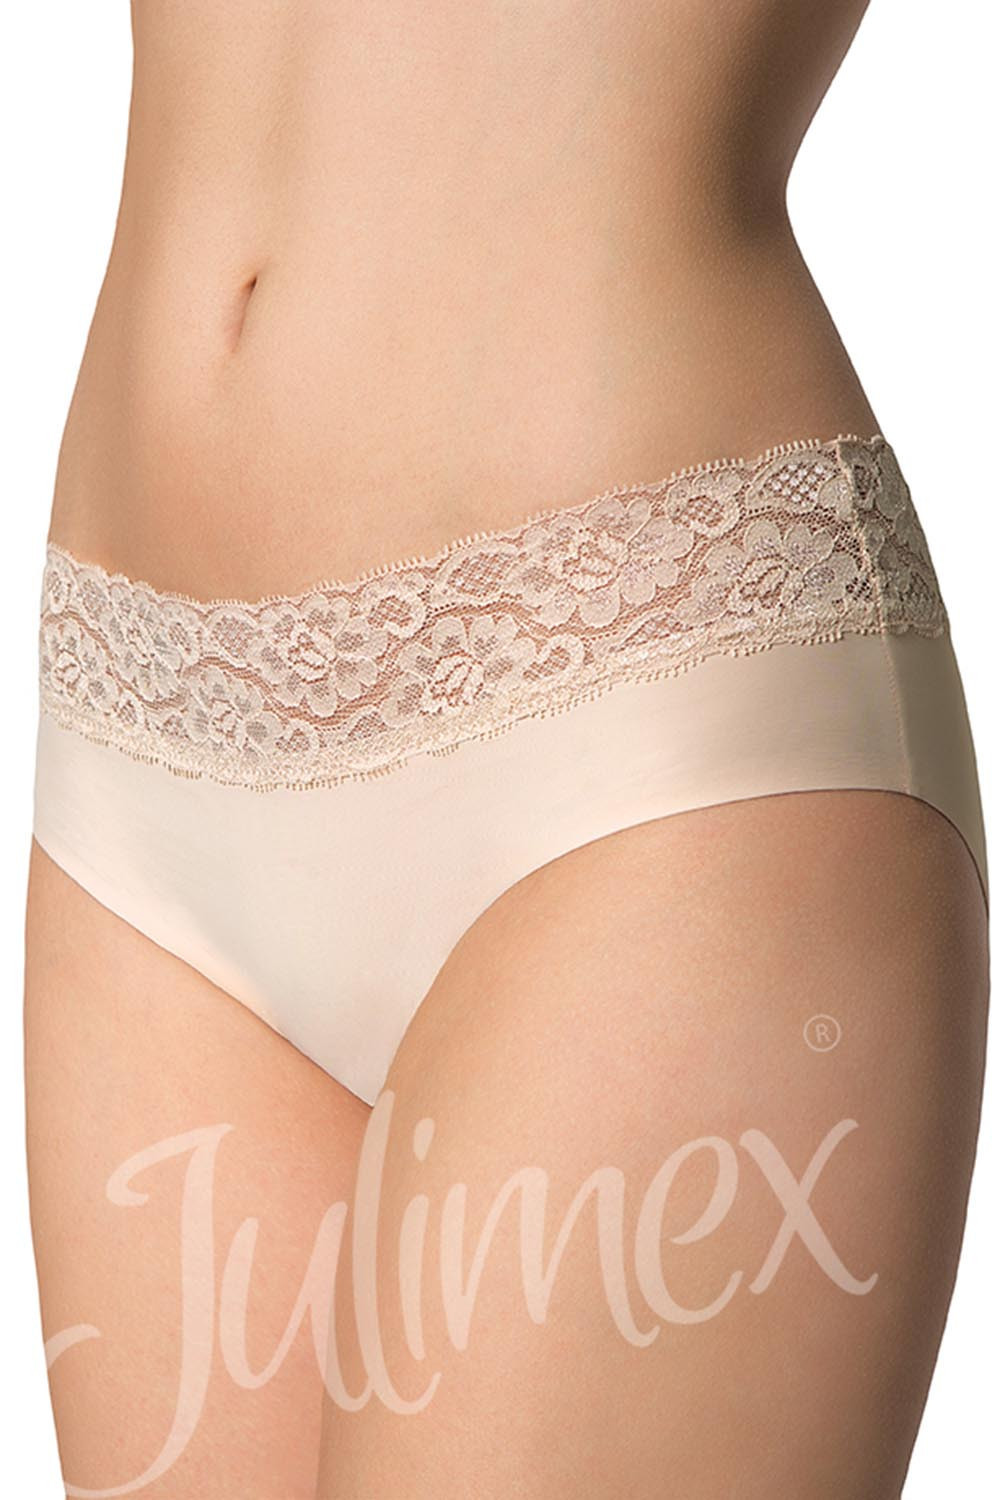 Julimex Hipster panty kolor:beżowy XL